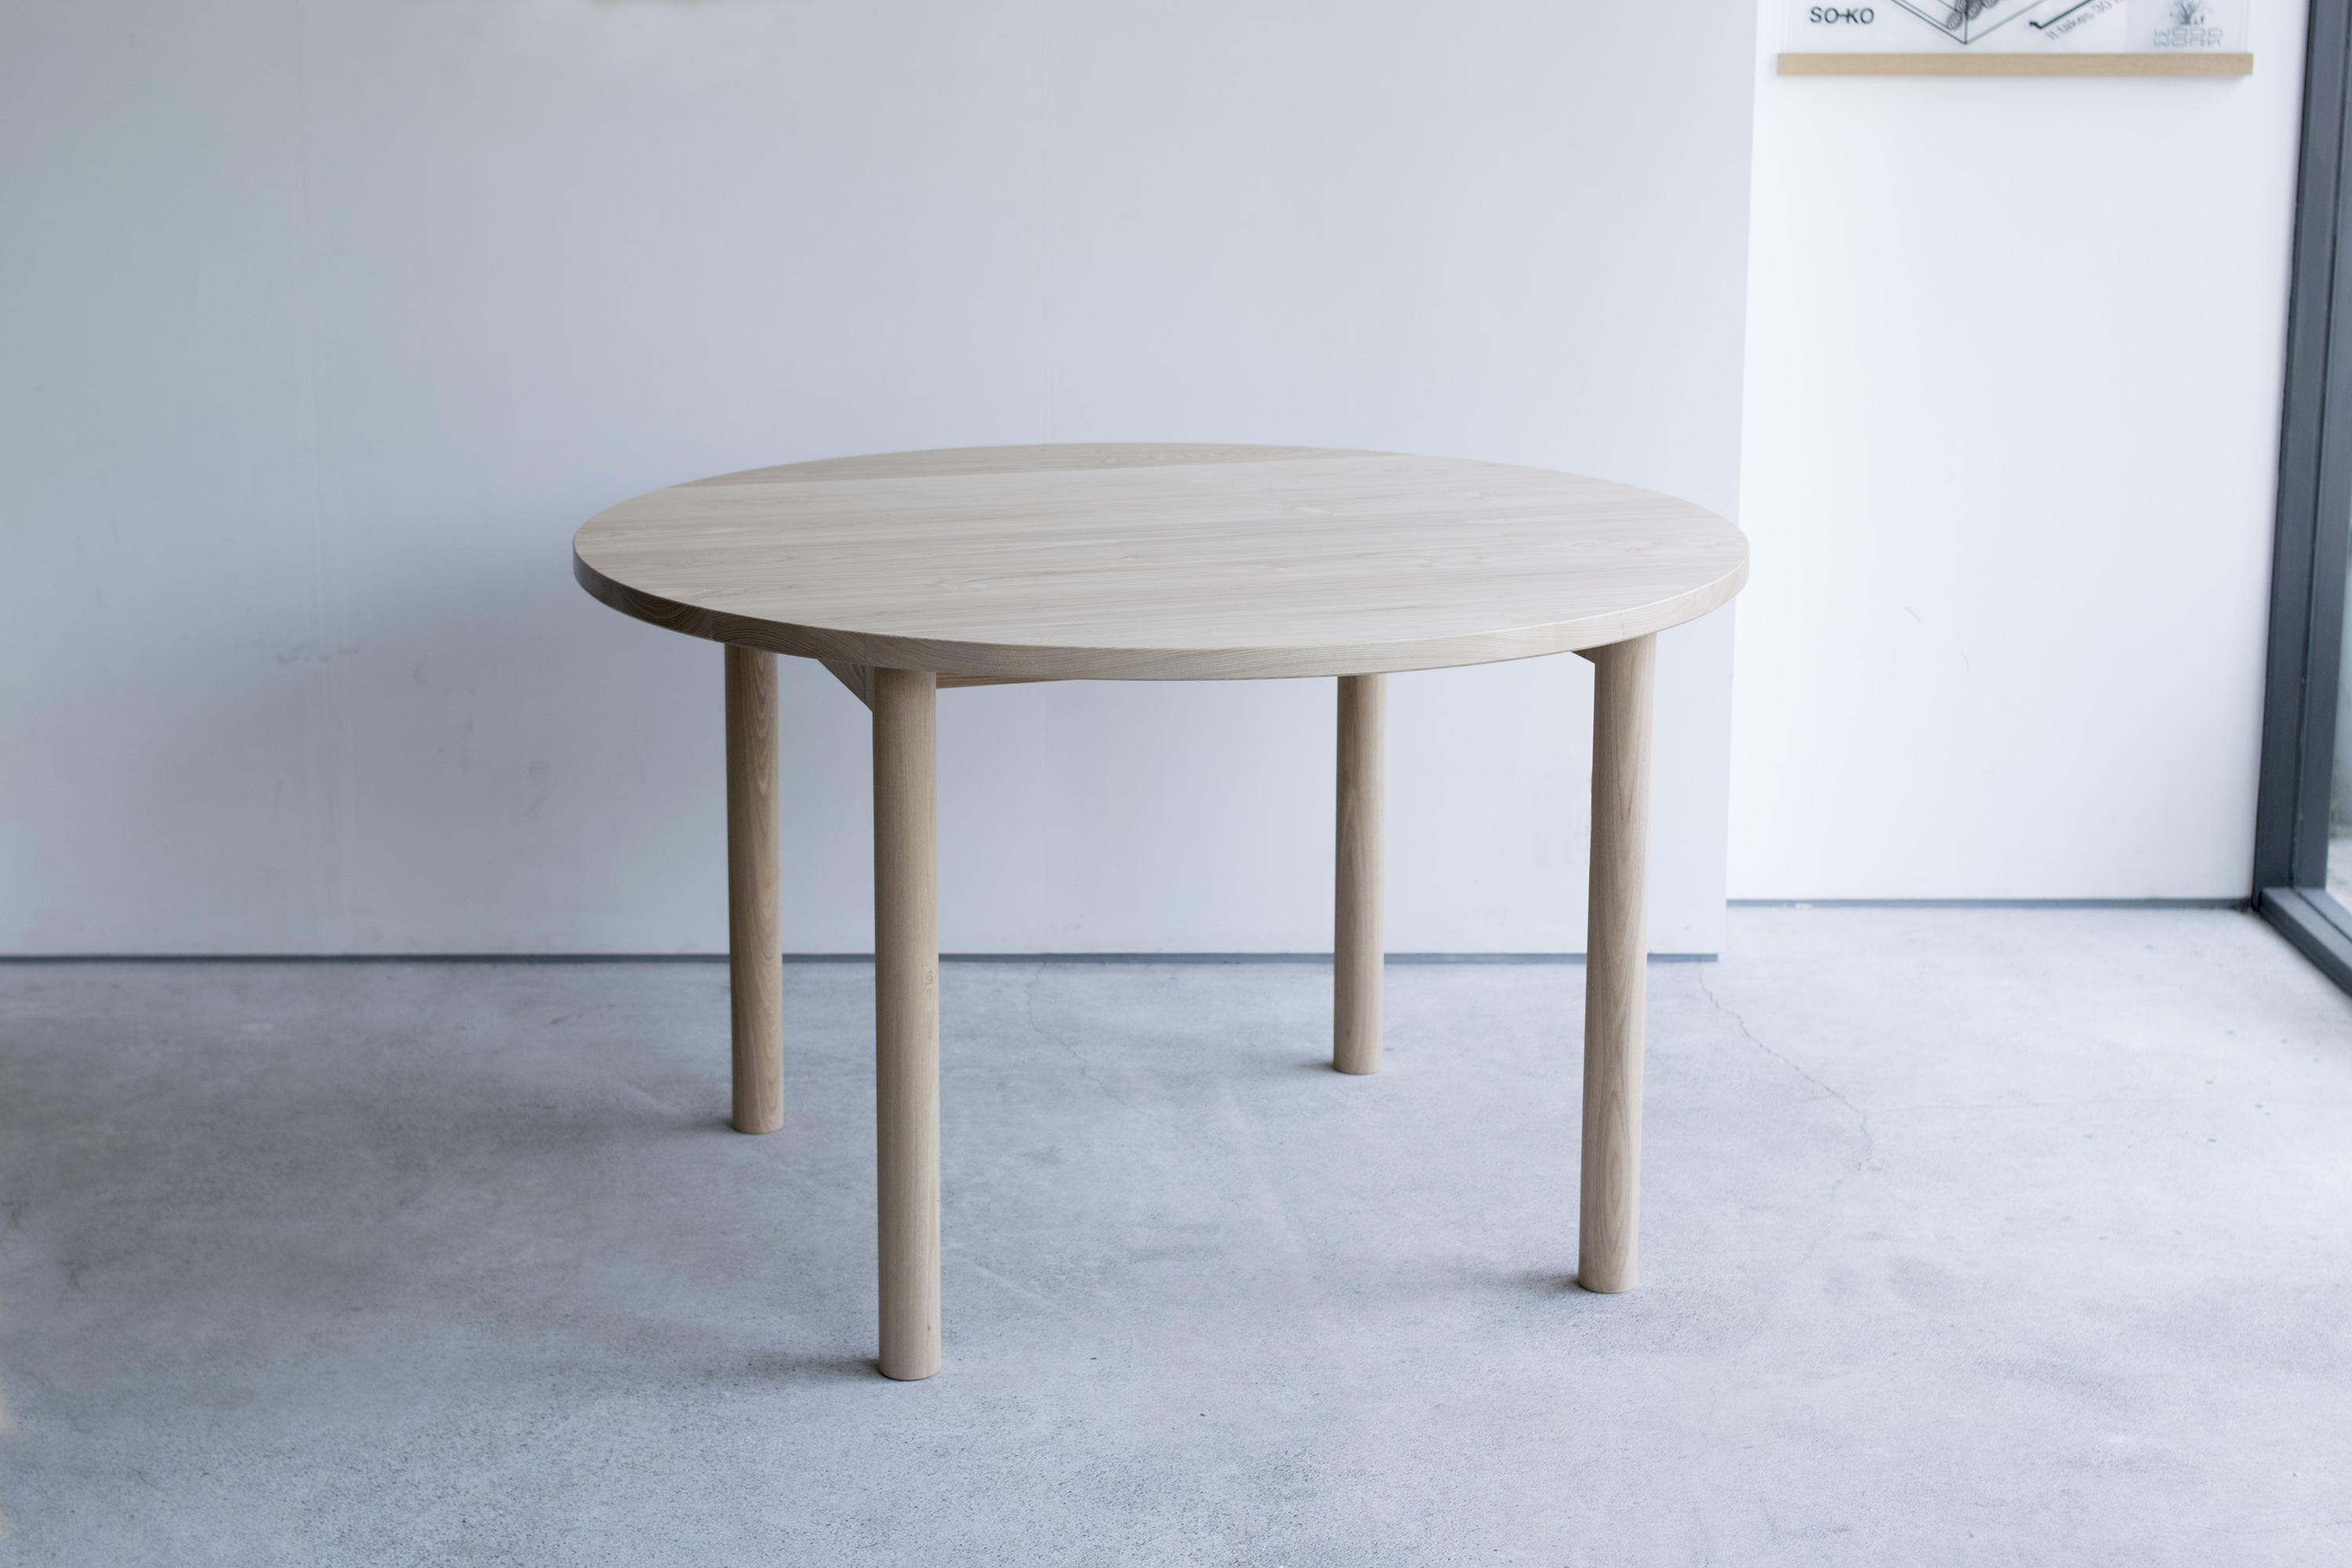 STANDARD TABLE R / ROUND